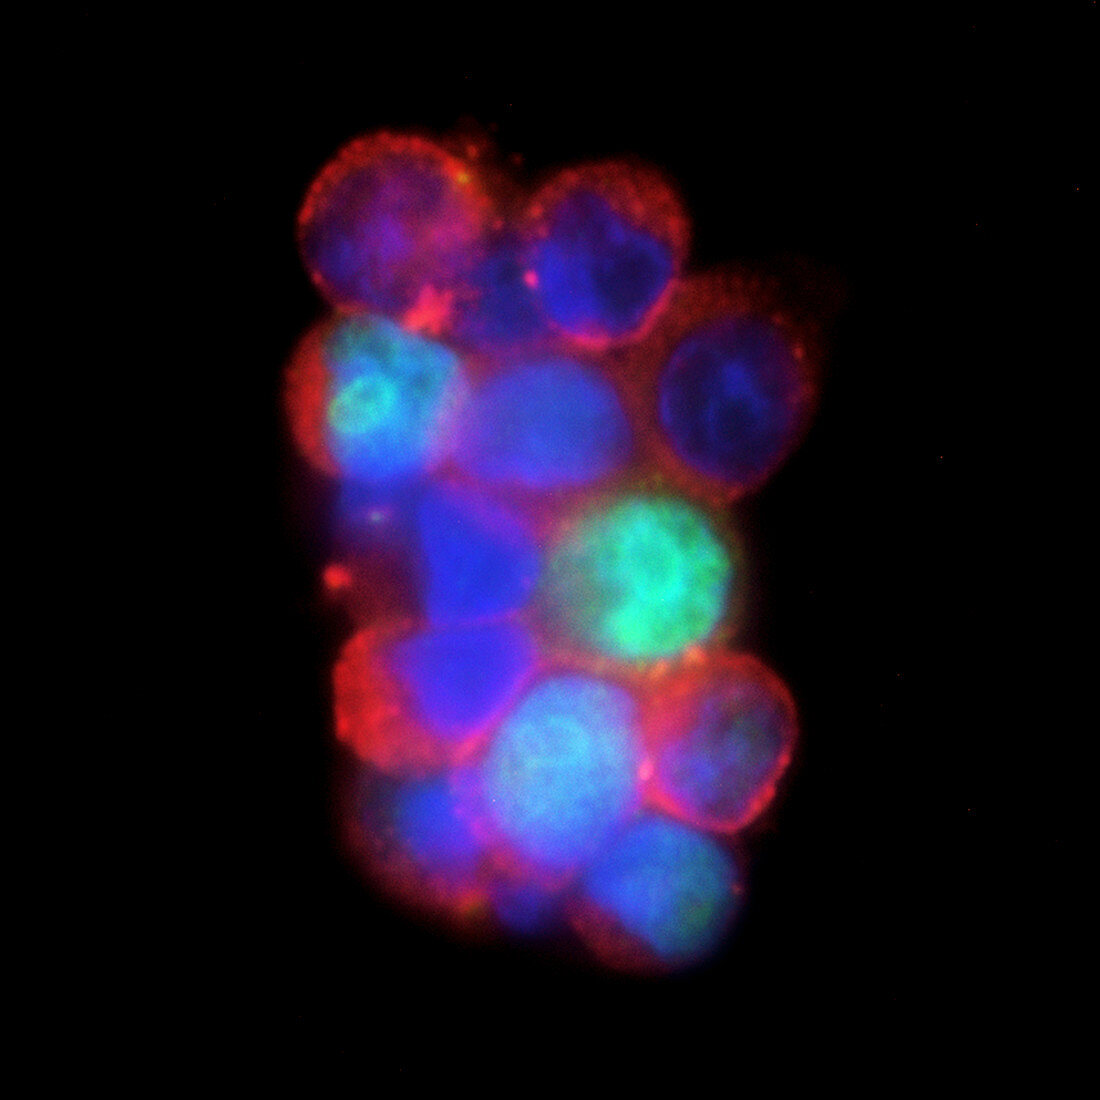 Circulating breast cancer cells